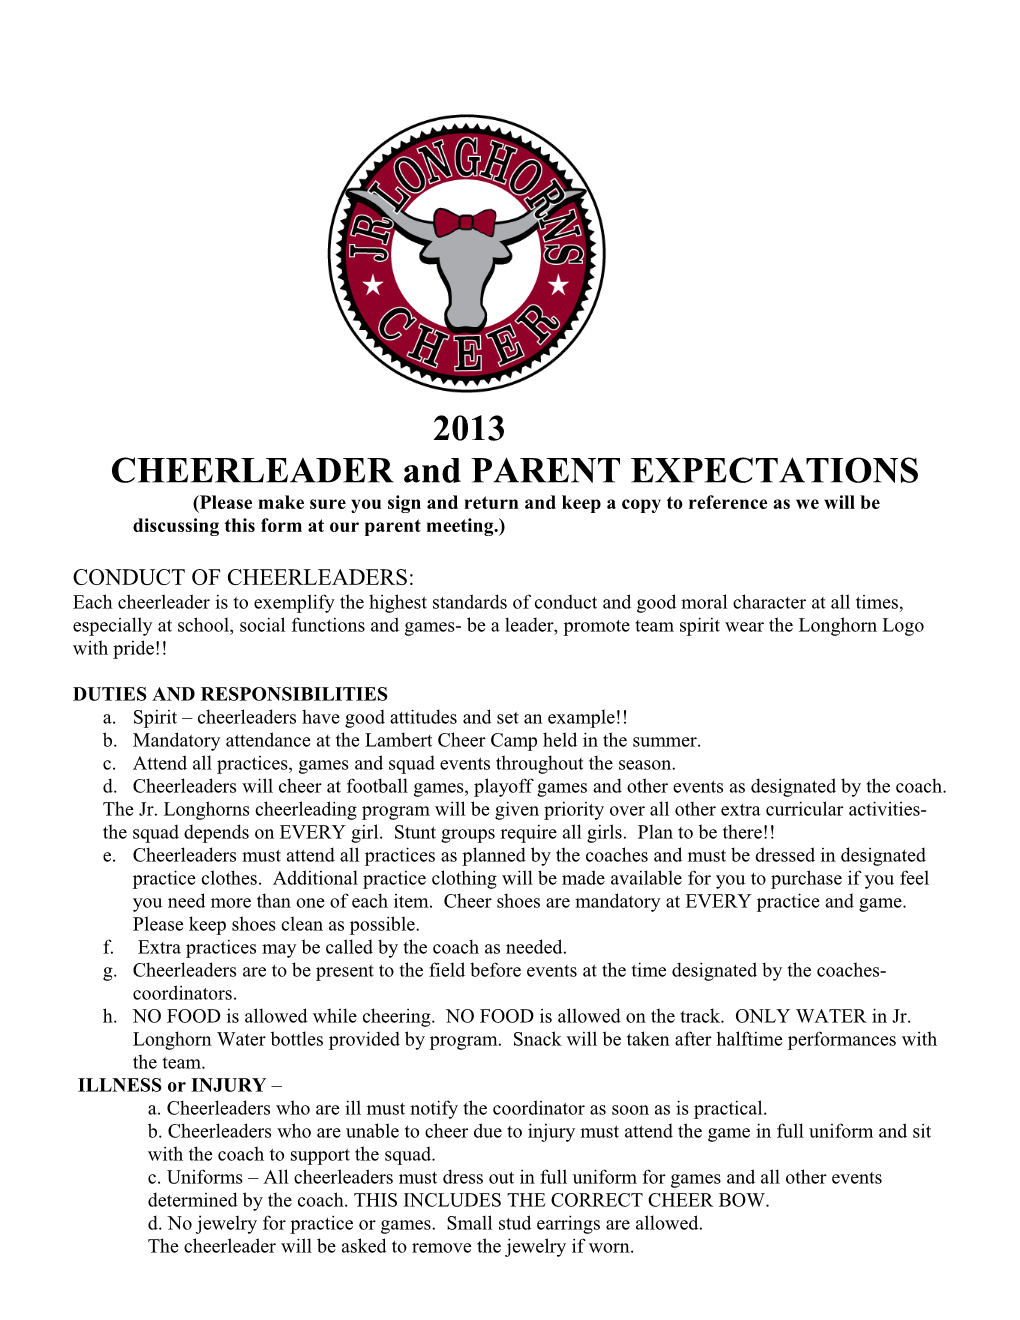 Cheer Leading Rules and Regulations